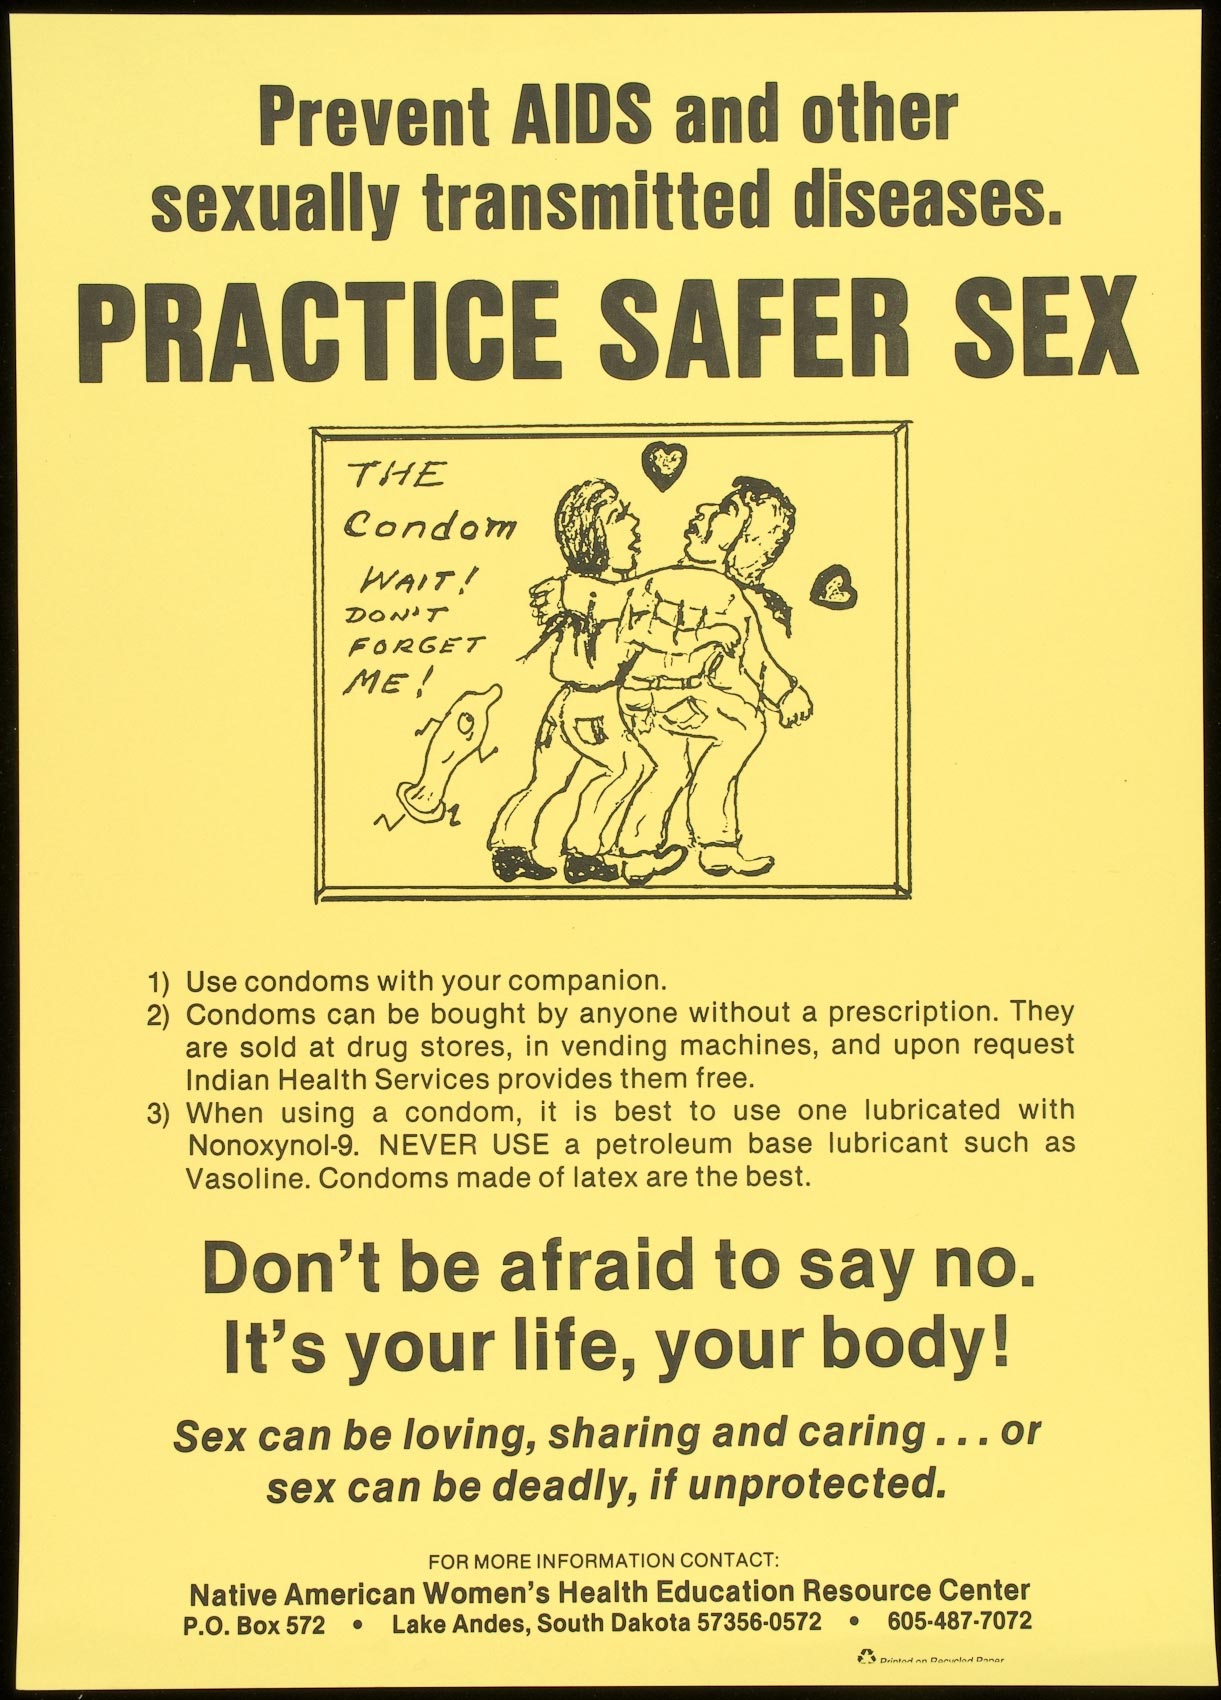 Prevent Aids And Other Sexually Transmitted Diseases Practice Safer Sex Dont Be Afraid To Say